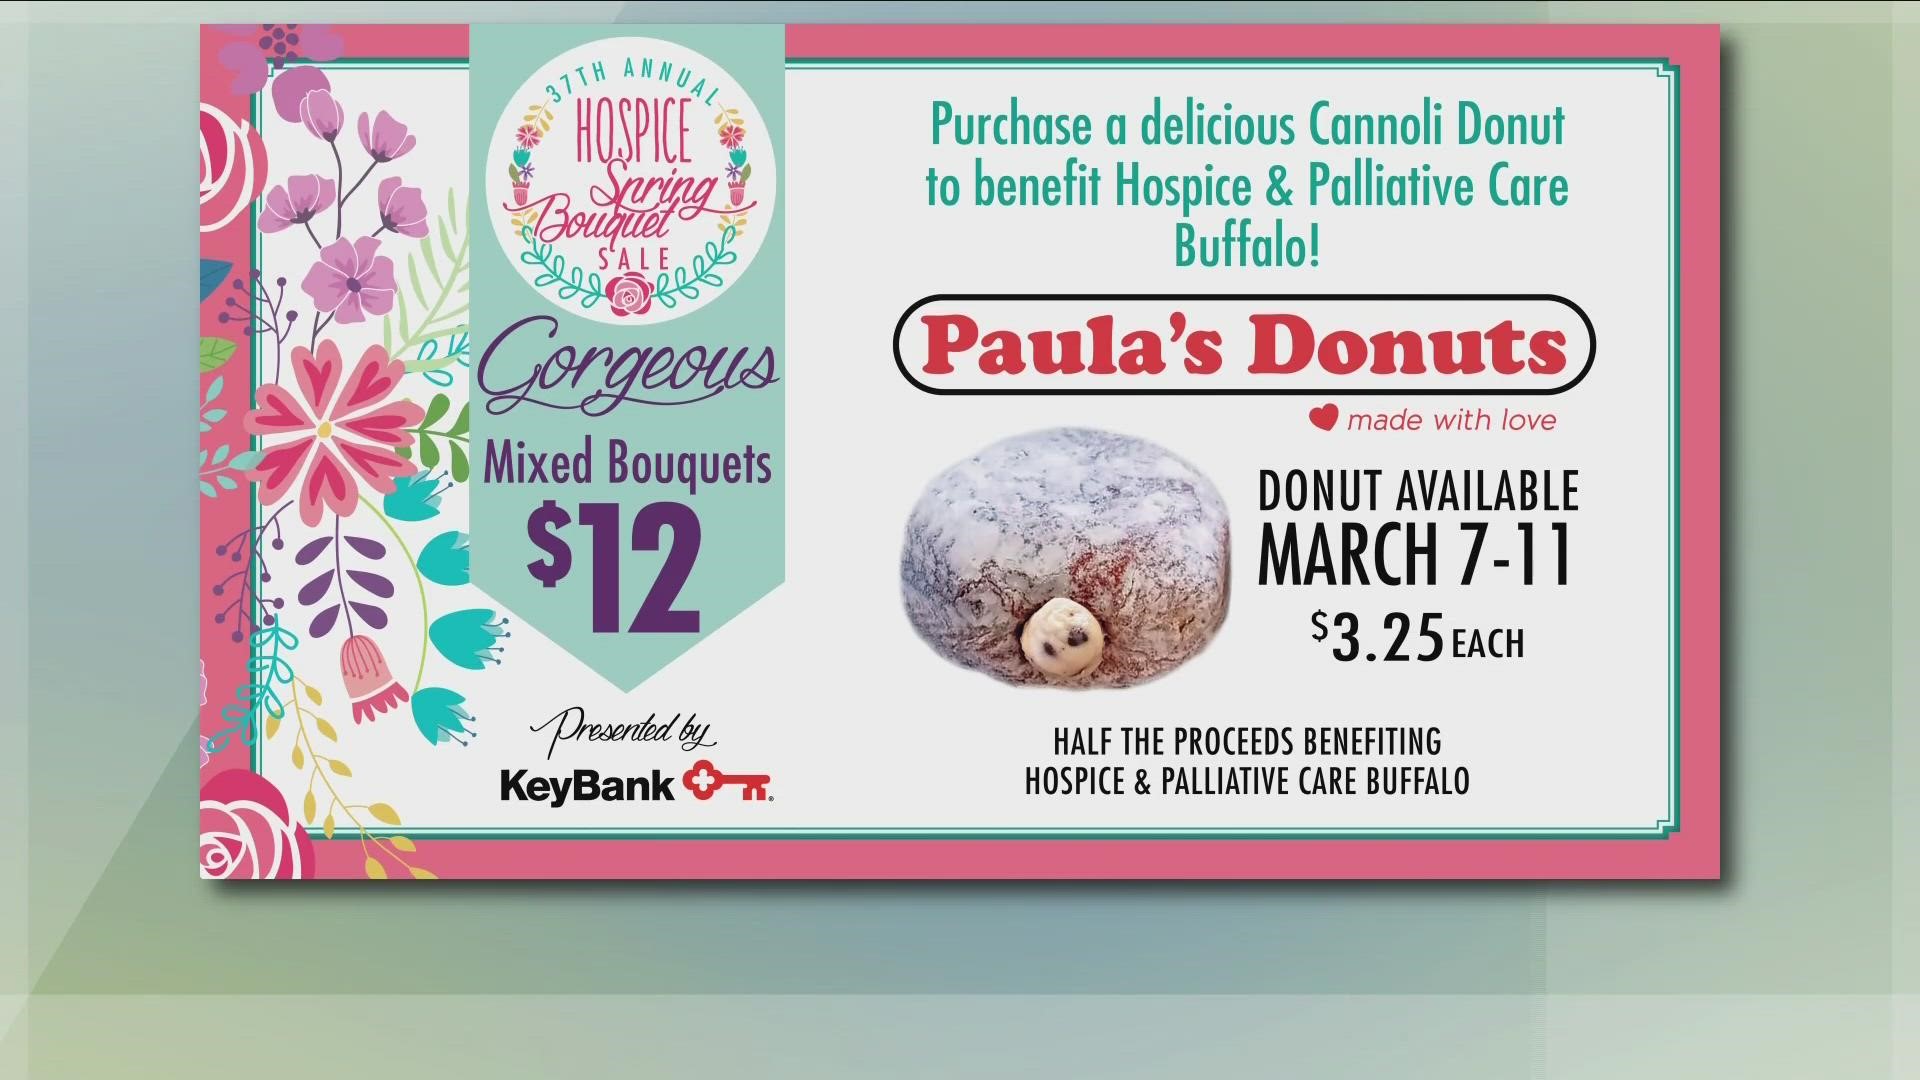 The popular local donut chain is kicking off their week long fundraiser for Hospice Palliative Care Buffalo.